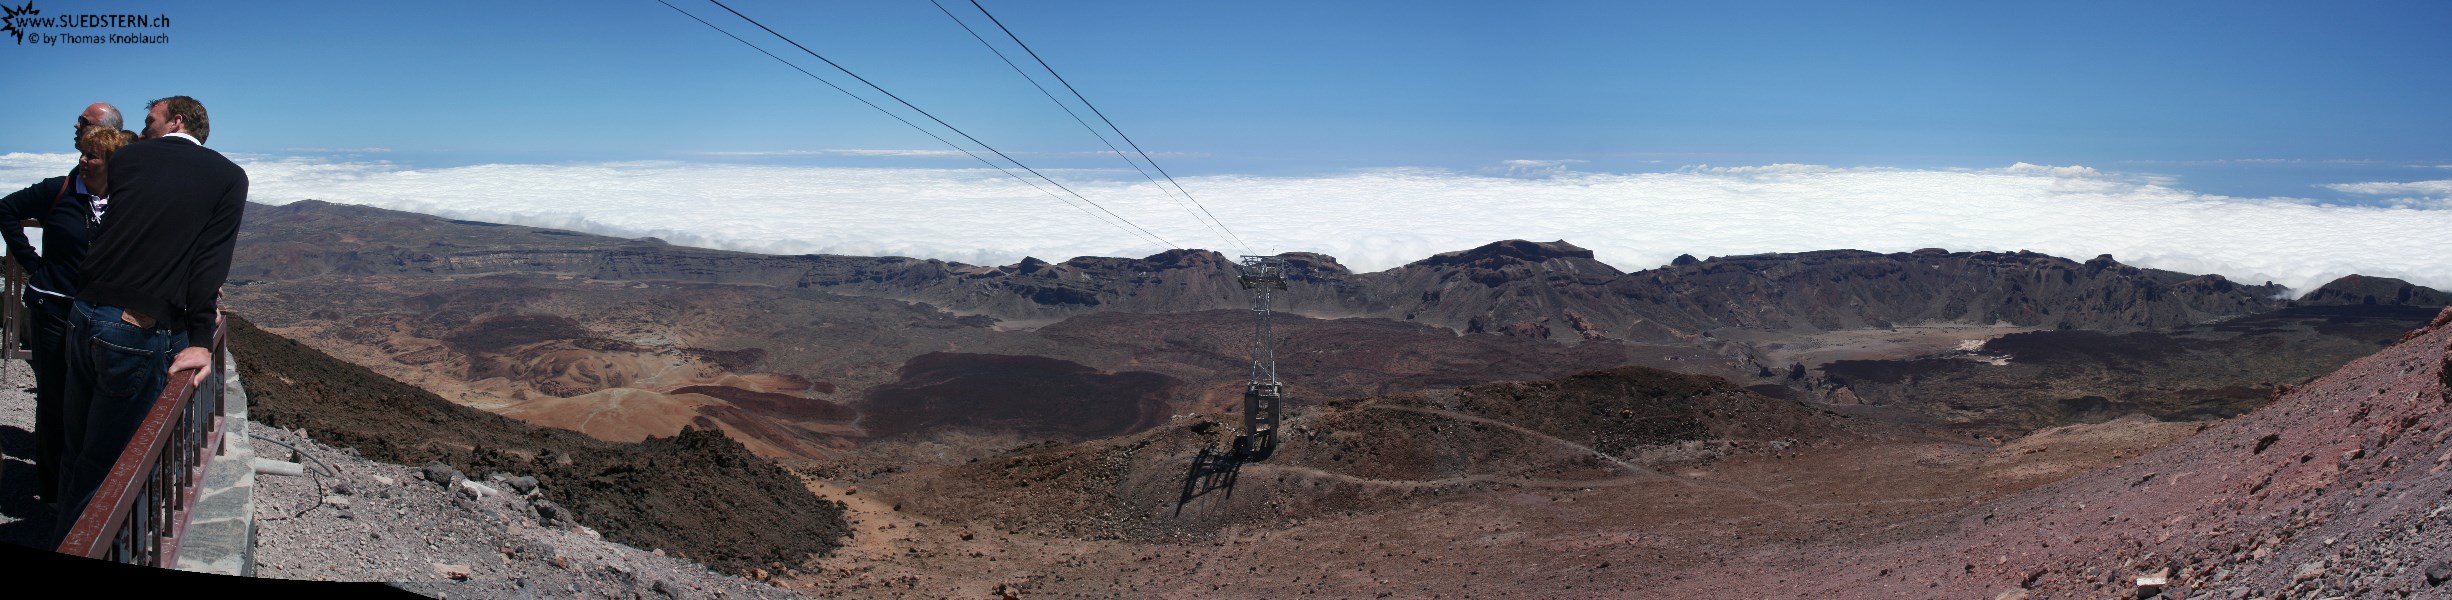 2007-09-06 - 10 - Teneriffa, panorama direction south from Teide mountain station altitude 3500m